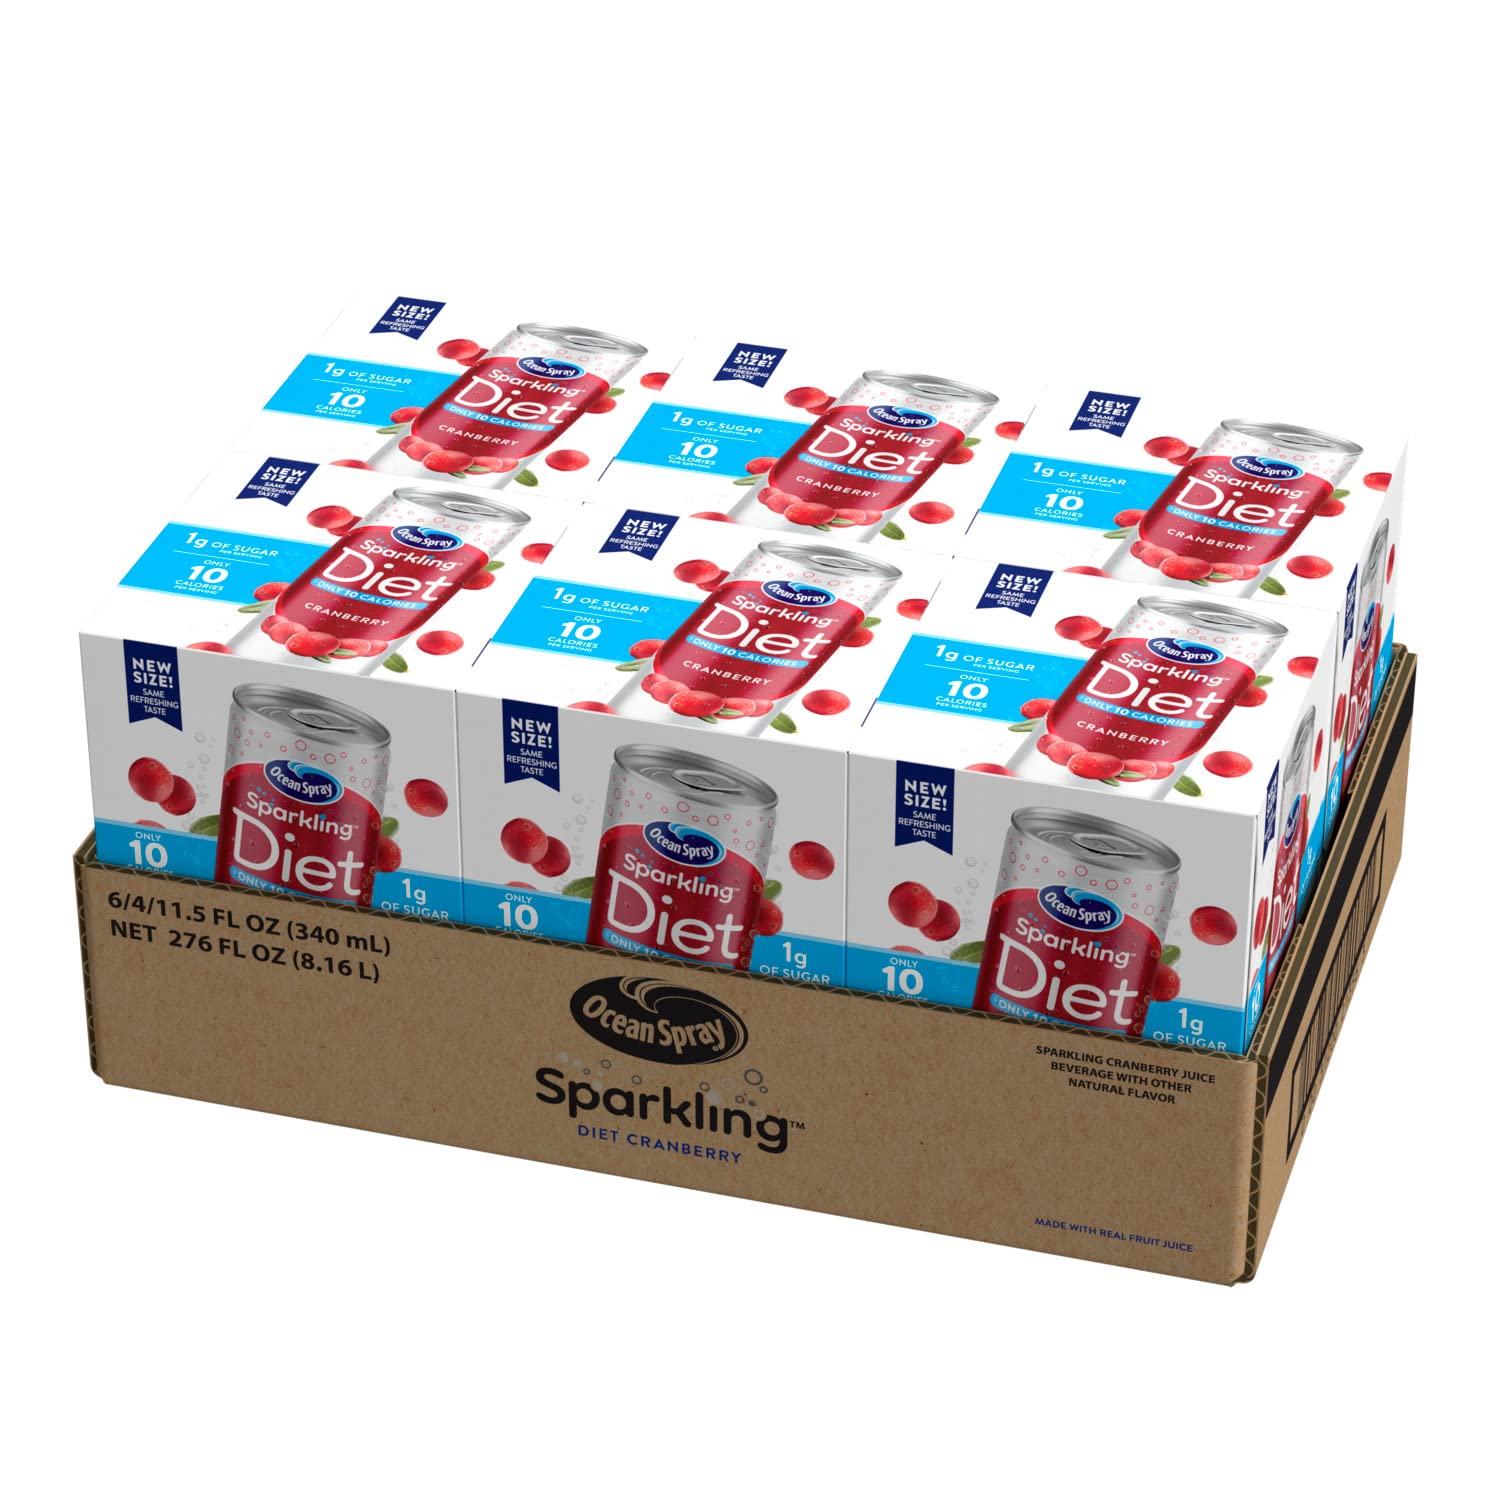 Ocean Spray® Sparkling Diet Cranberry Juice Drink, 11.5 Fl Oz Cans, 4 Count (Pack of 24) : Grocery & Gourmet Food